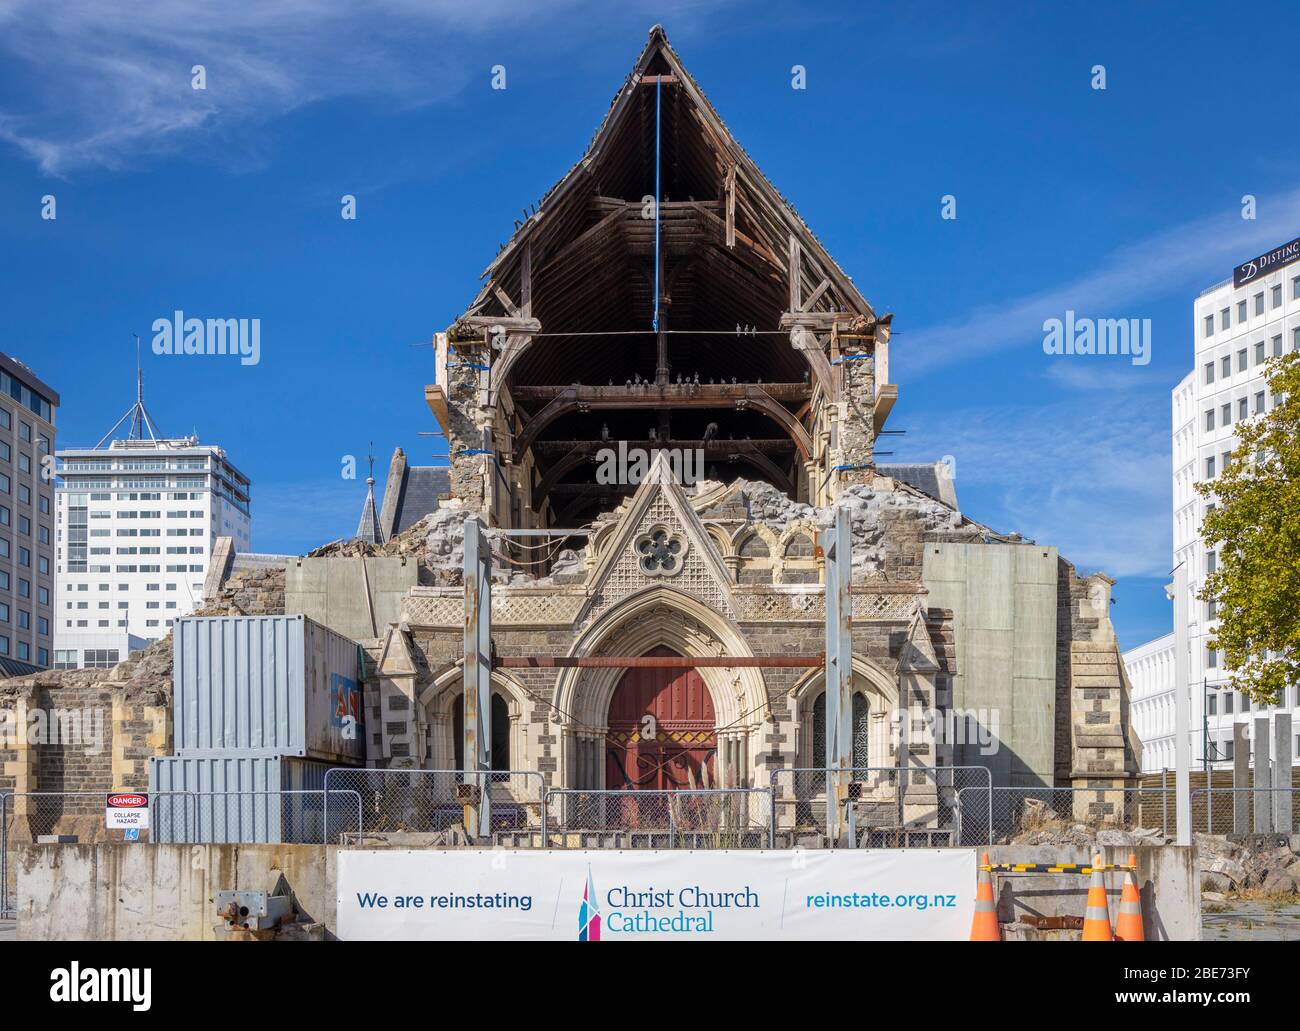 The earthquake damaged 1904 Christchurch Cathedral, Christchurch, New Zealand. Awaiting restoration following the quake of 2011. Stock Photo